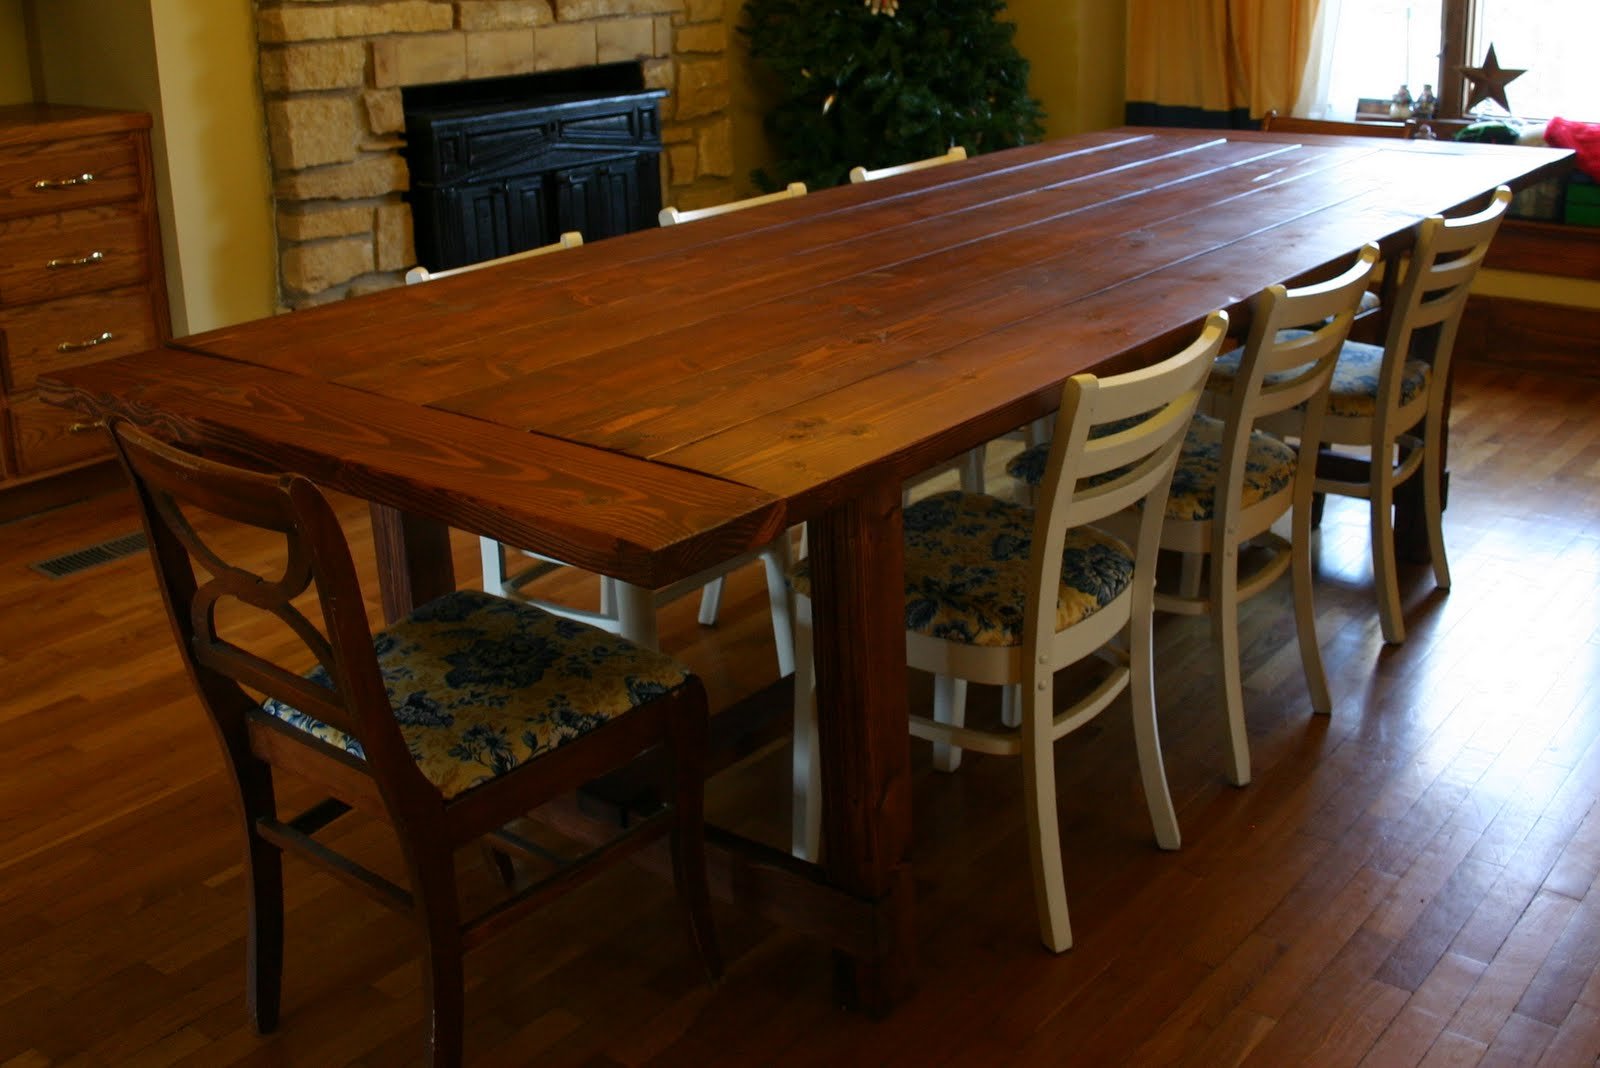 Diy Kitchen Table Plans | How To build an Easy DIY Woodworking 